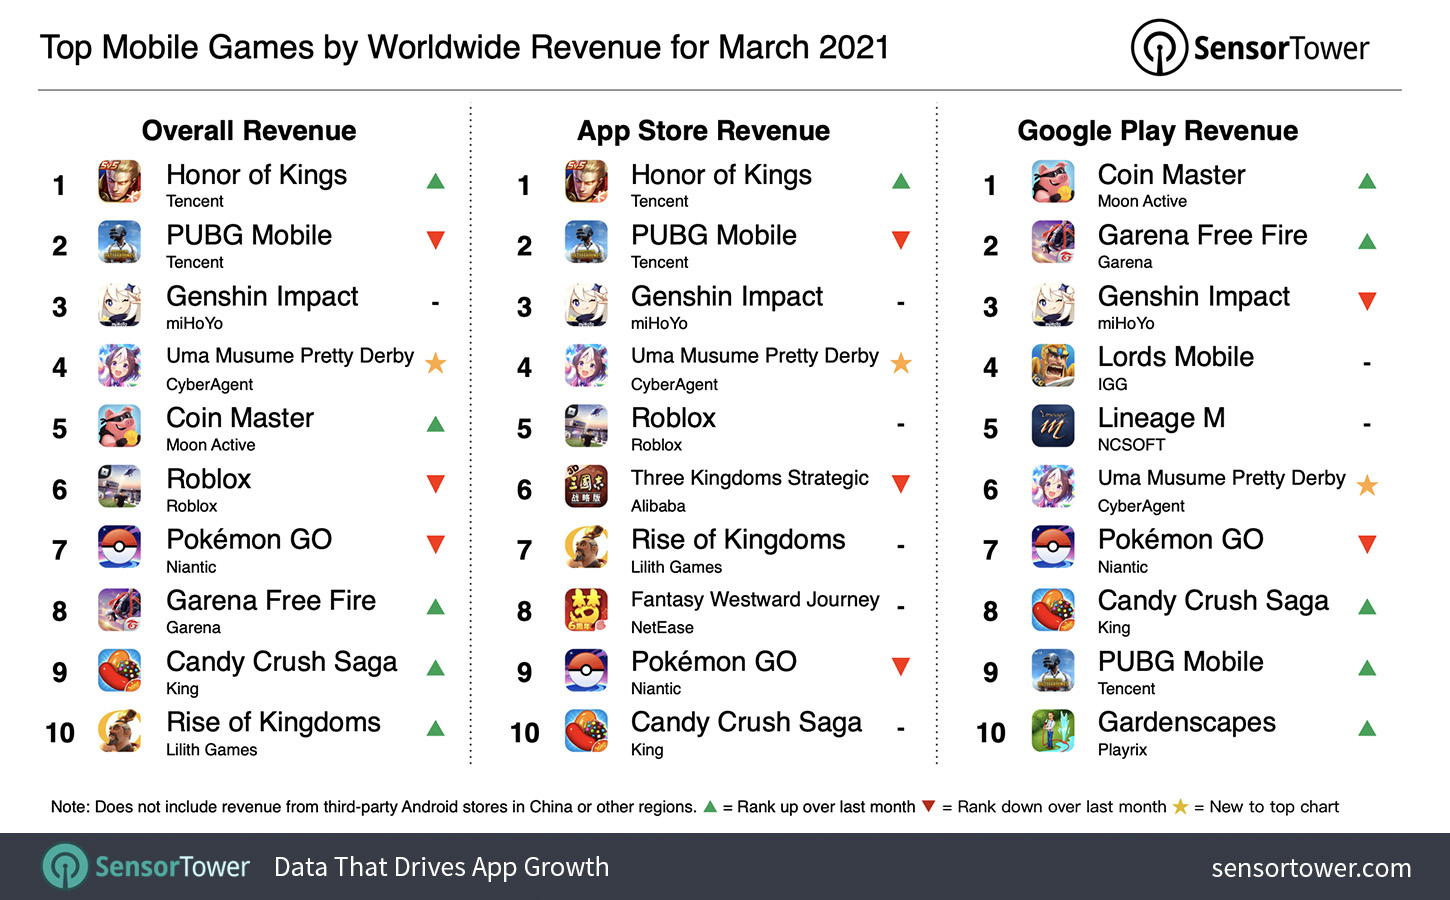 Top Grossing Mobile Games Worldwide for March 2021